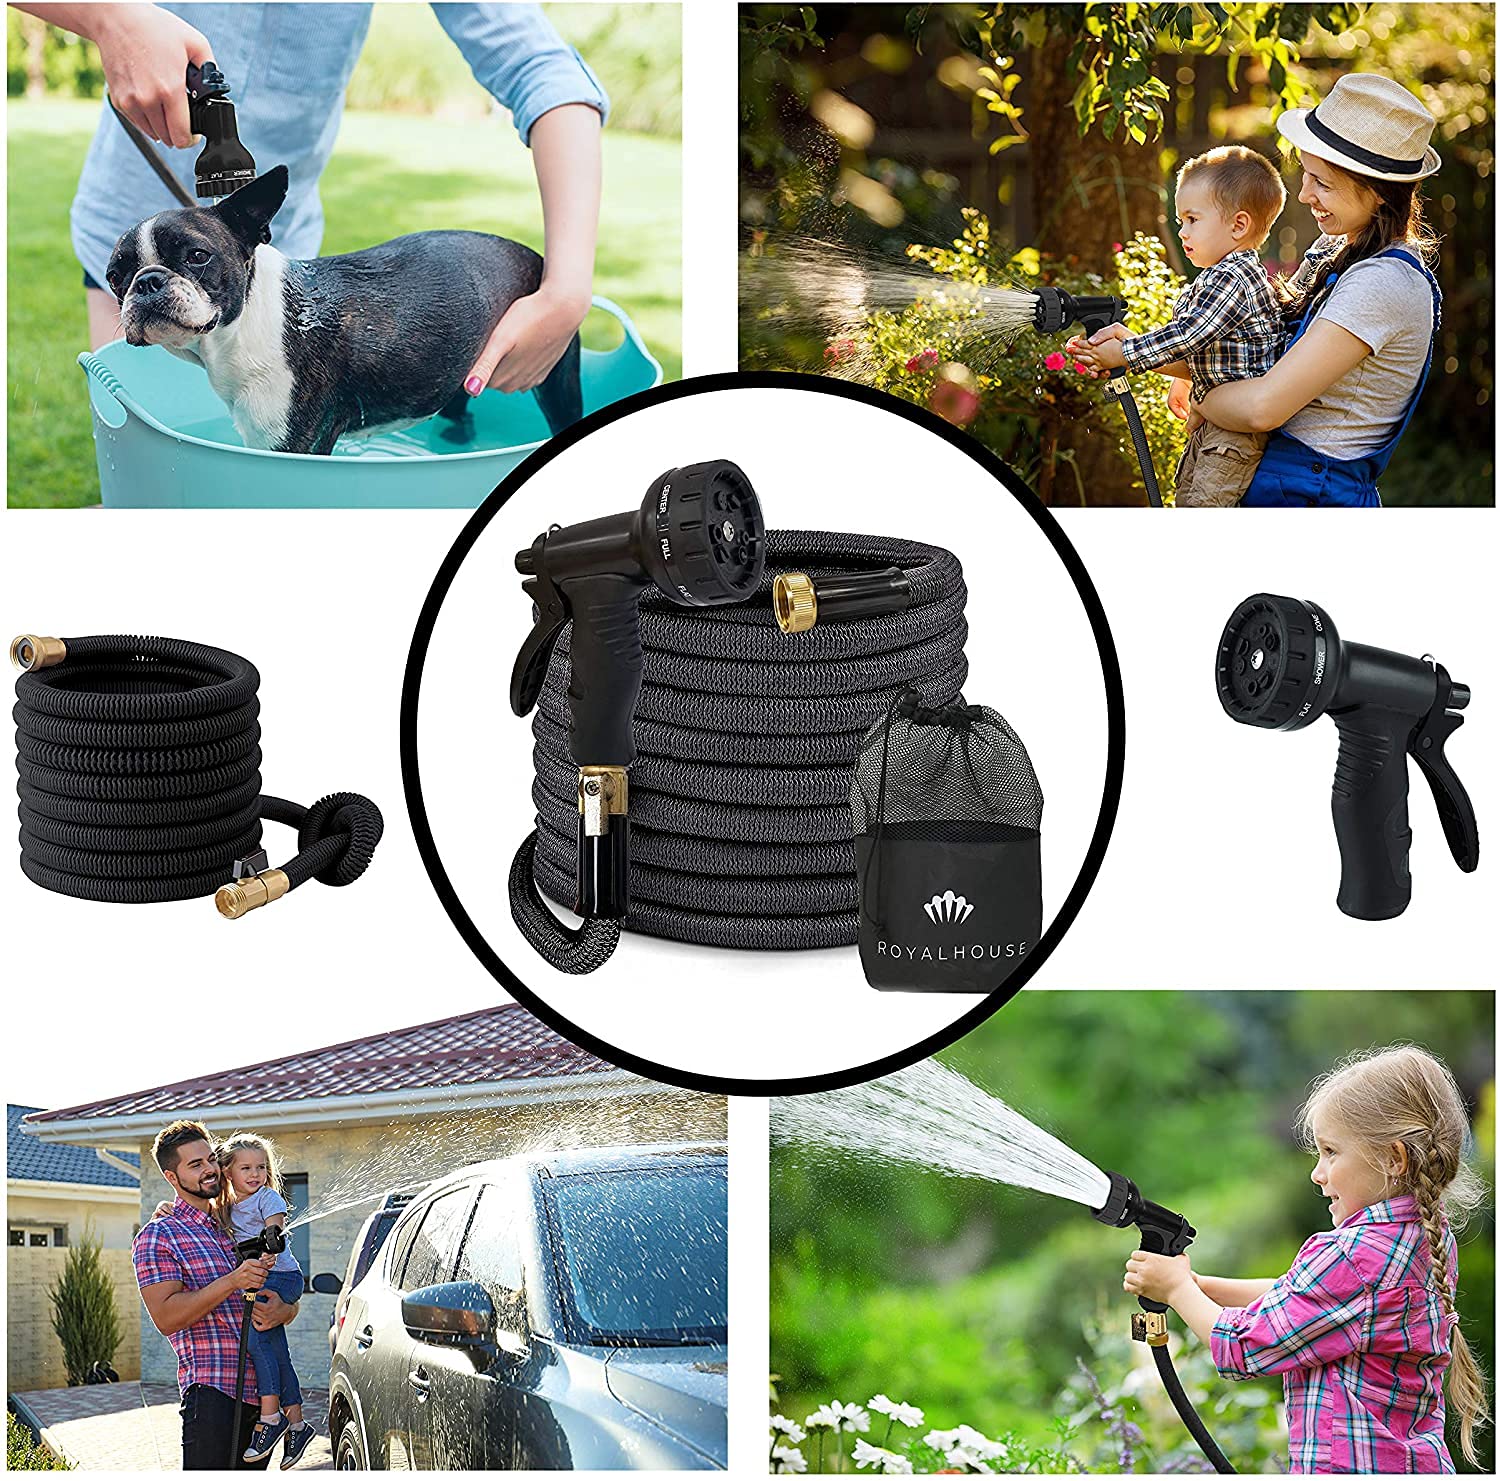 Black Expandable Garden Hose with 25/50/75/100 feet Options